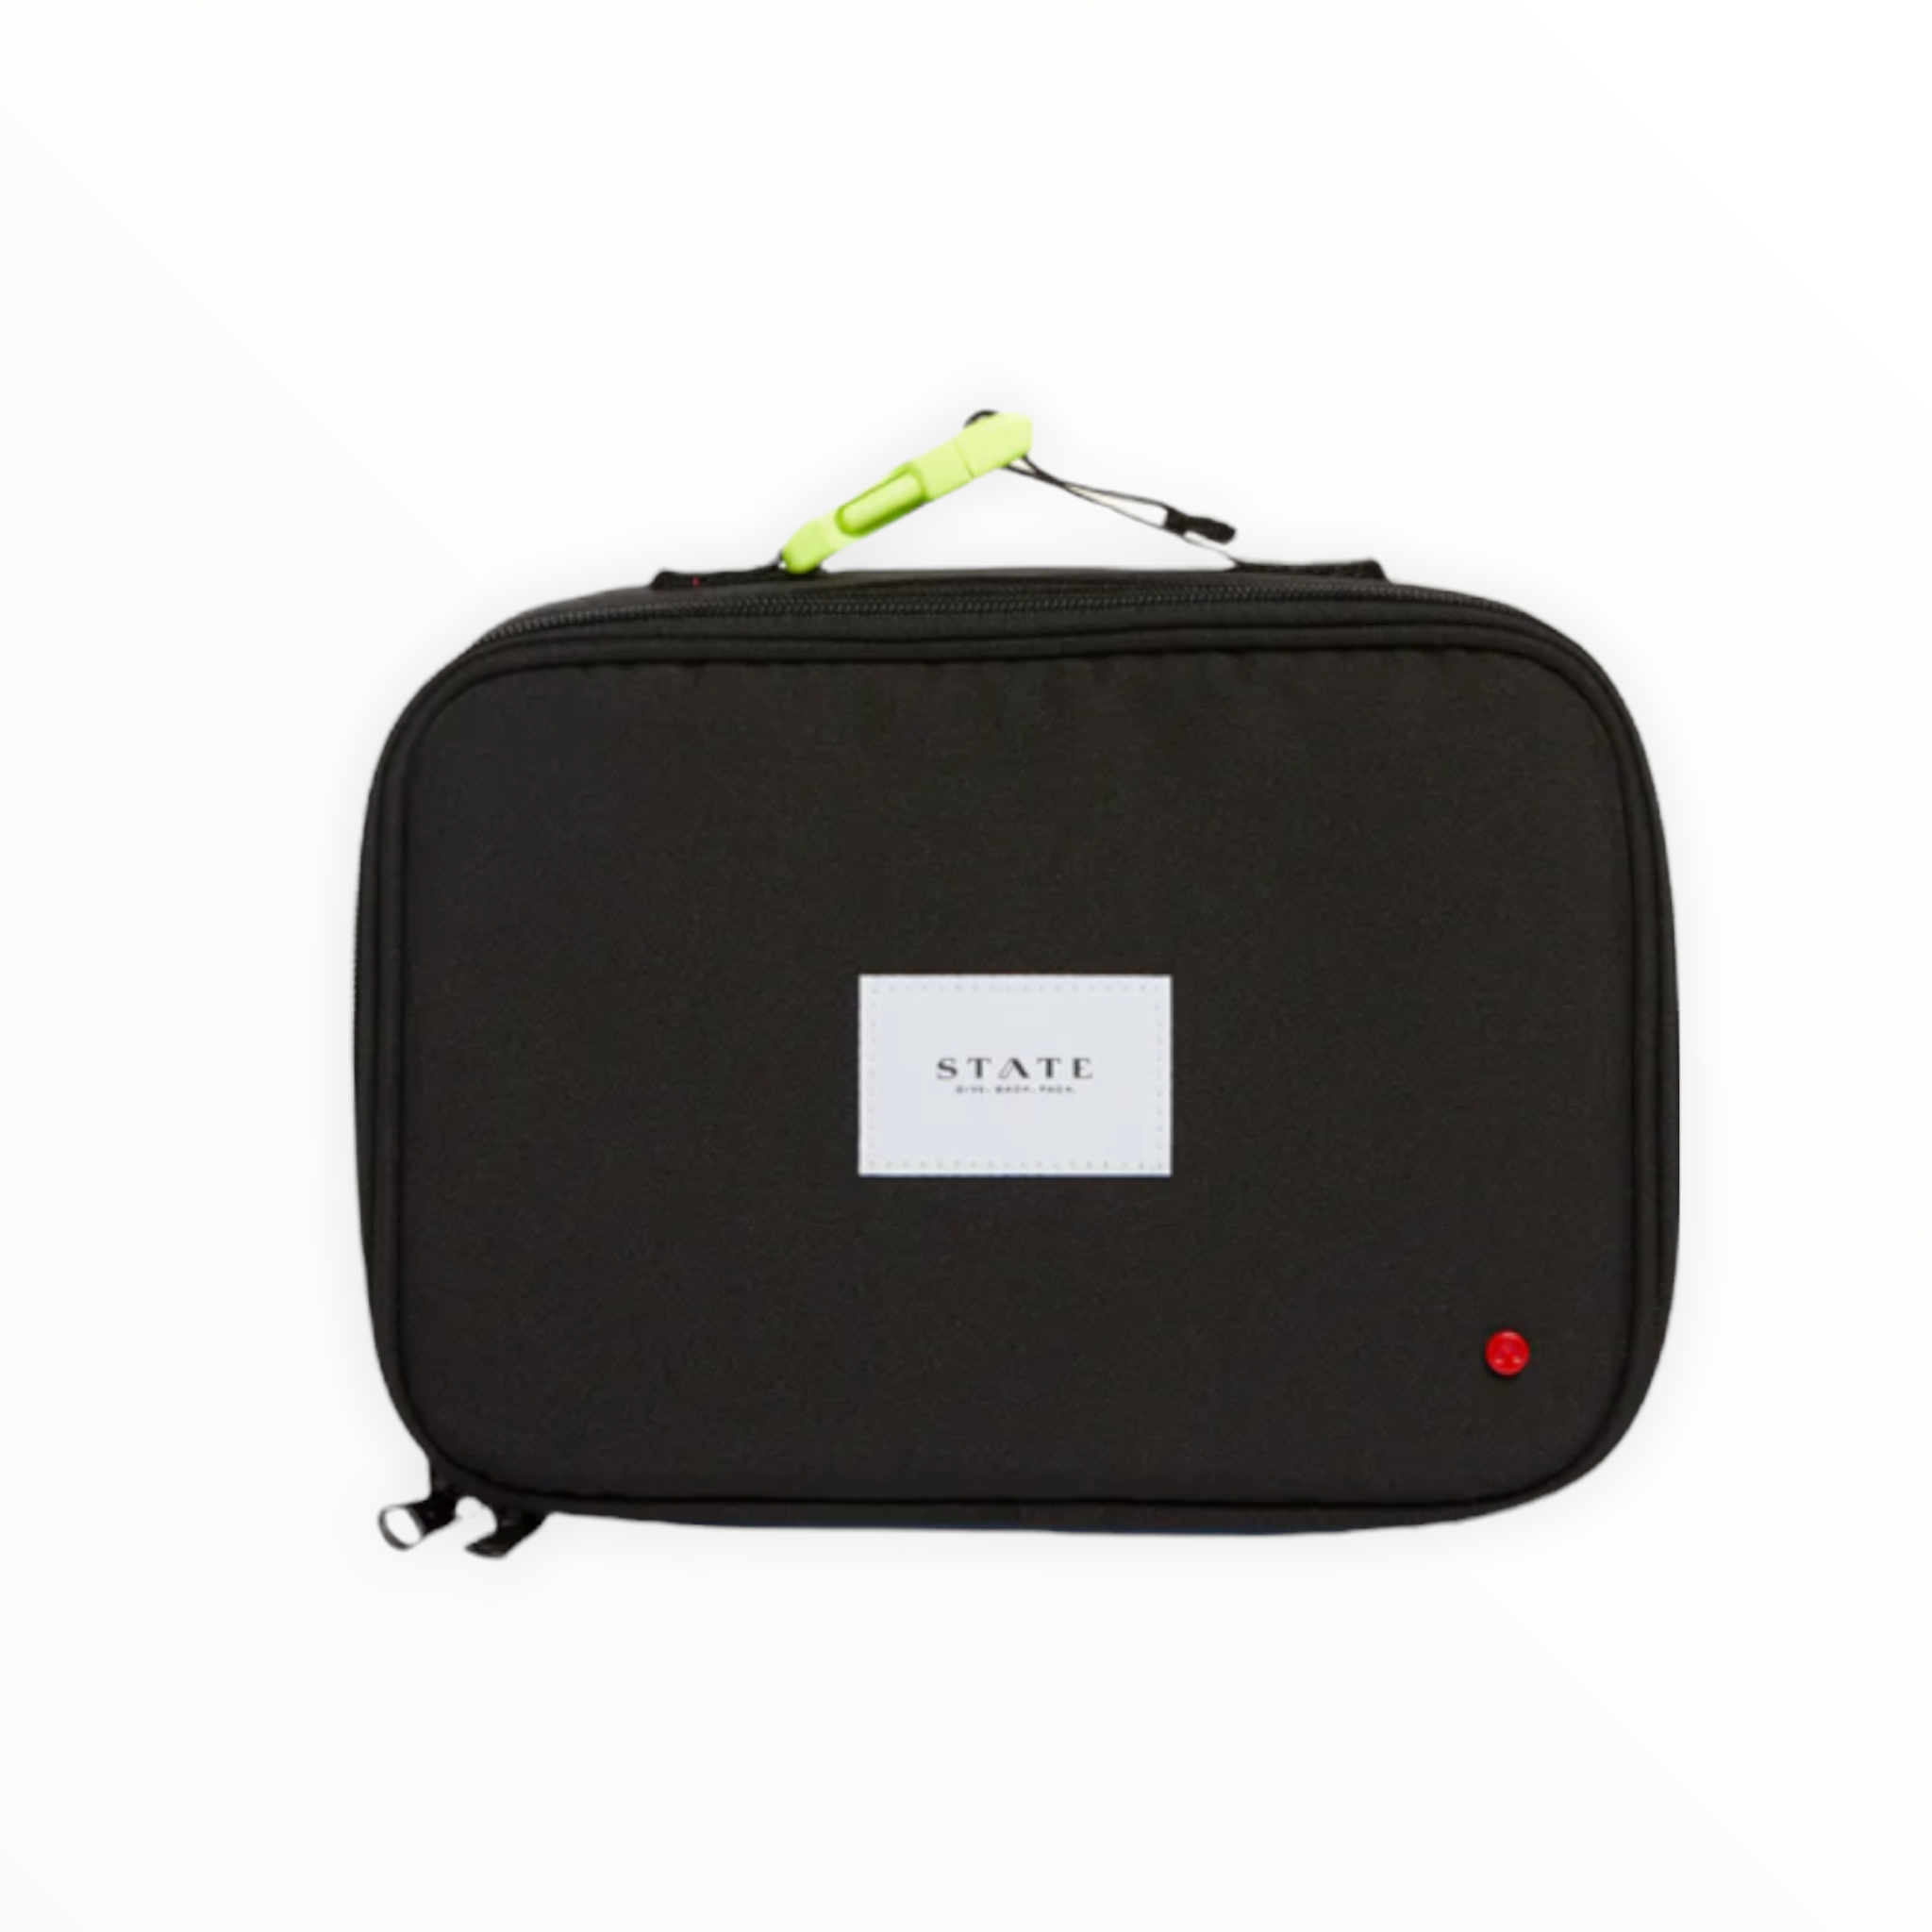 STATE RODGERS LUNCH BOX - BLACK